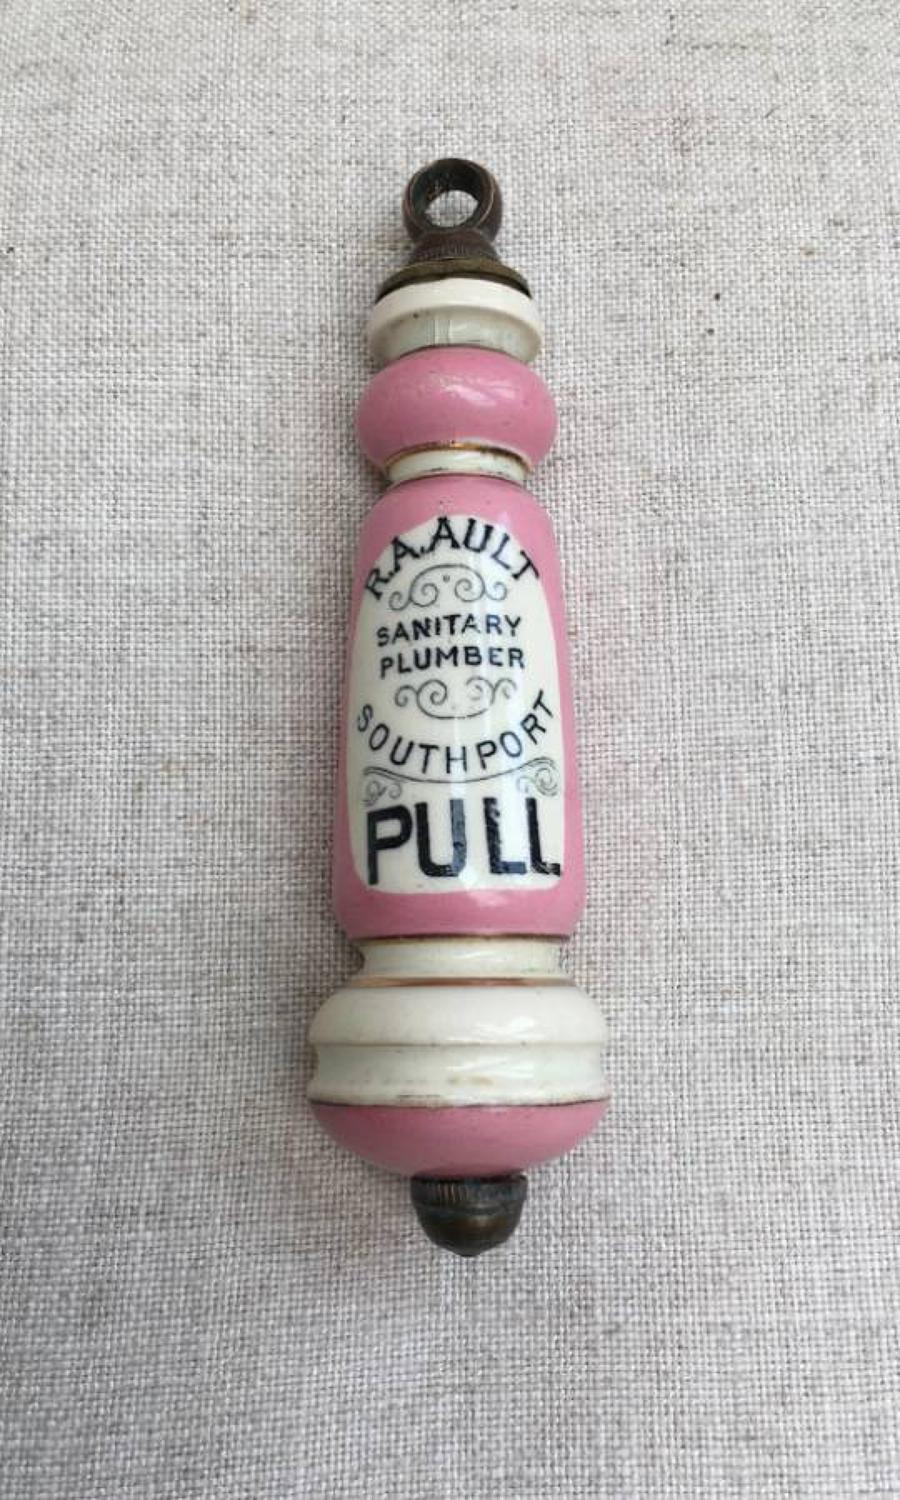 Superb Victorian Loo Pull - Rare Pink